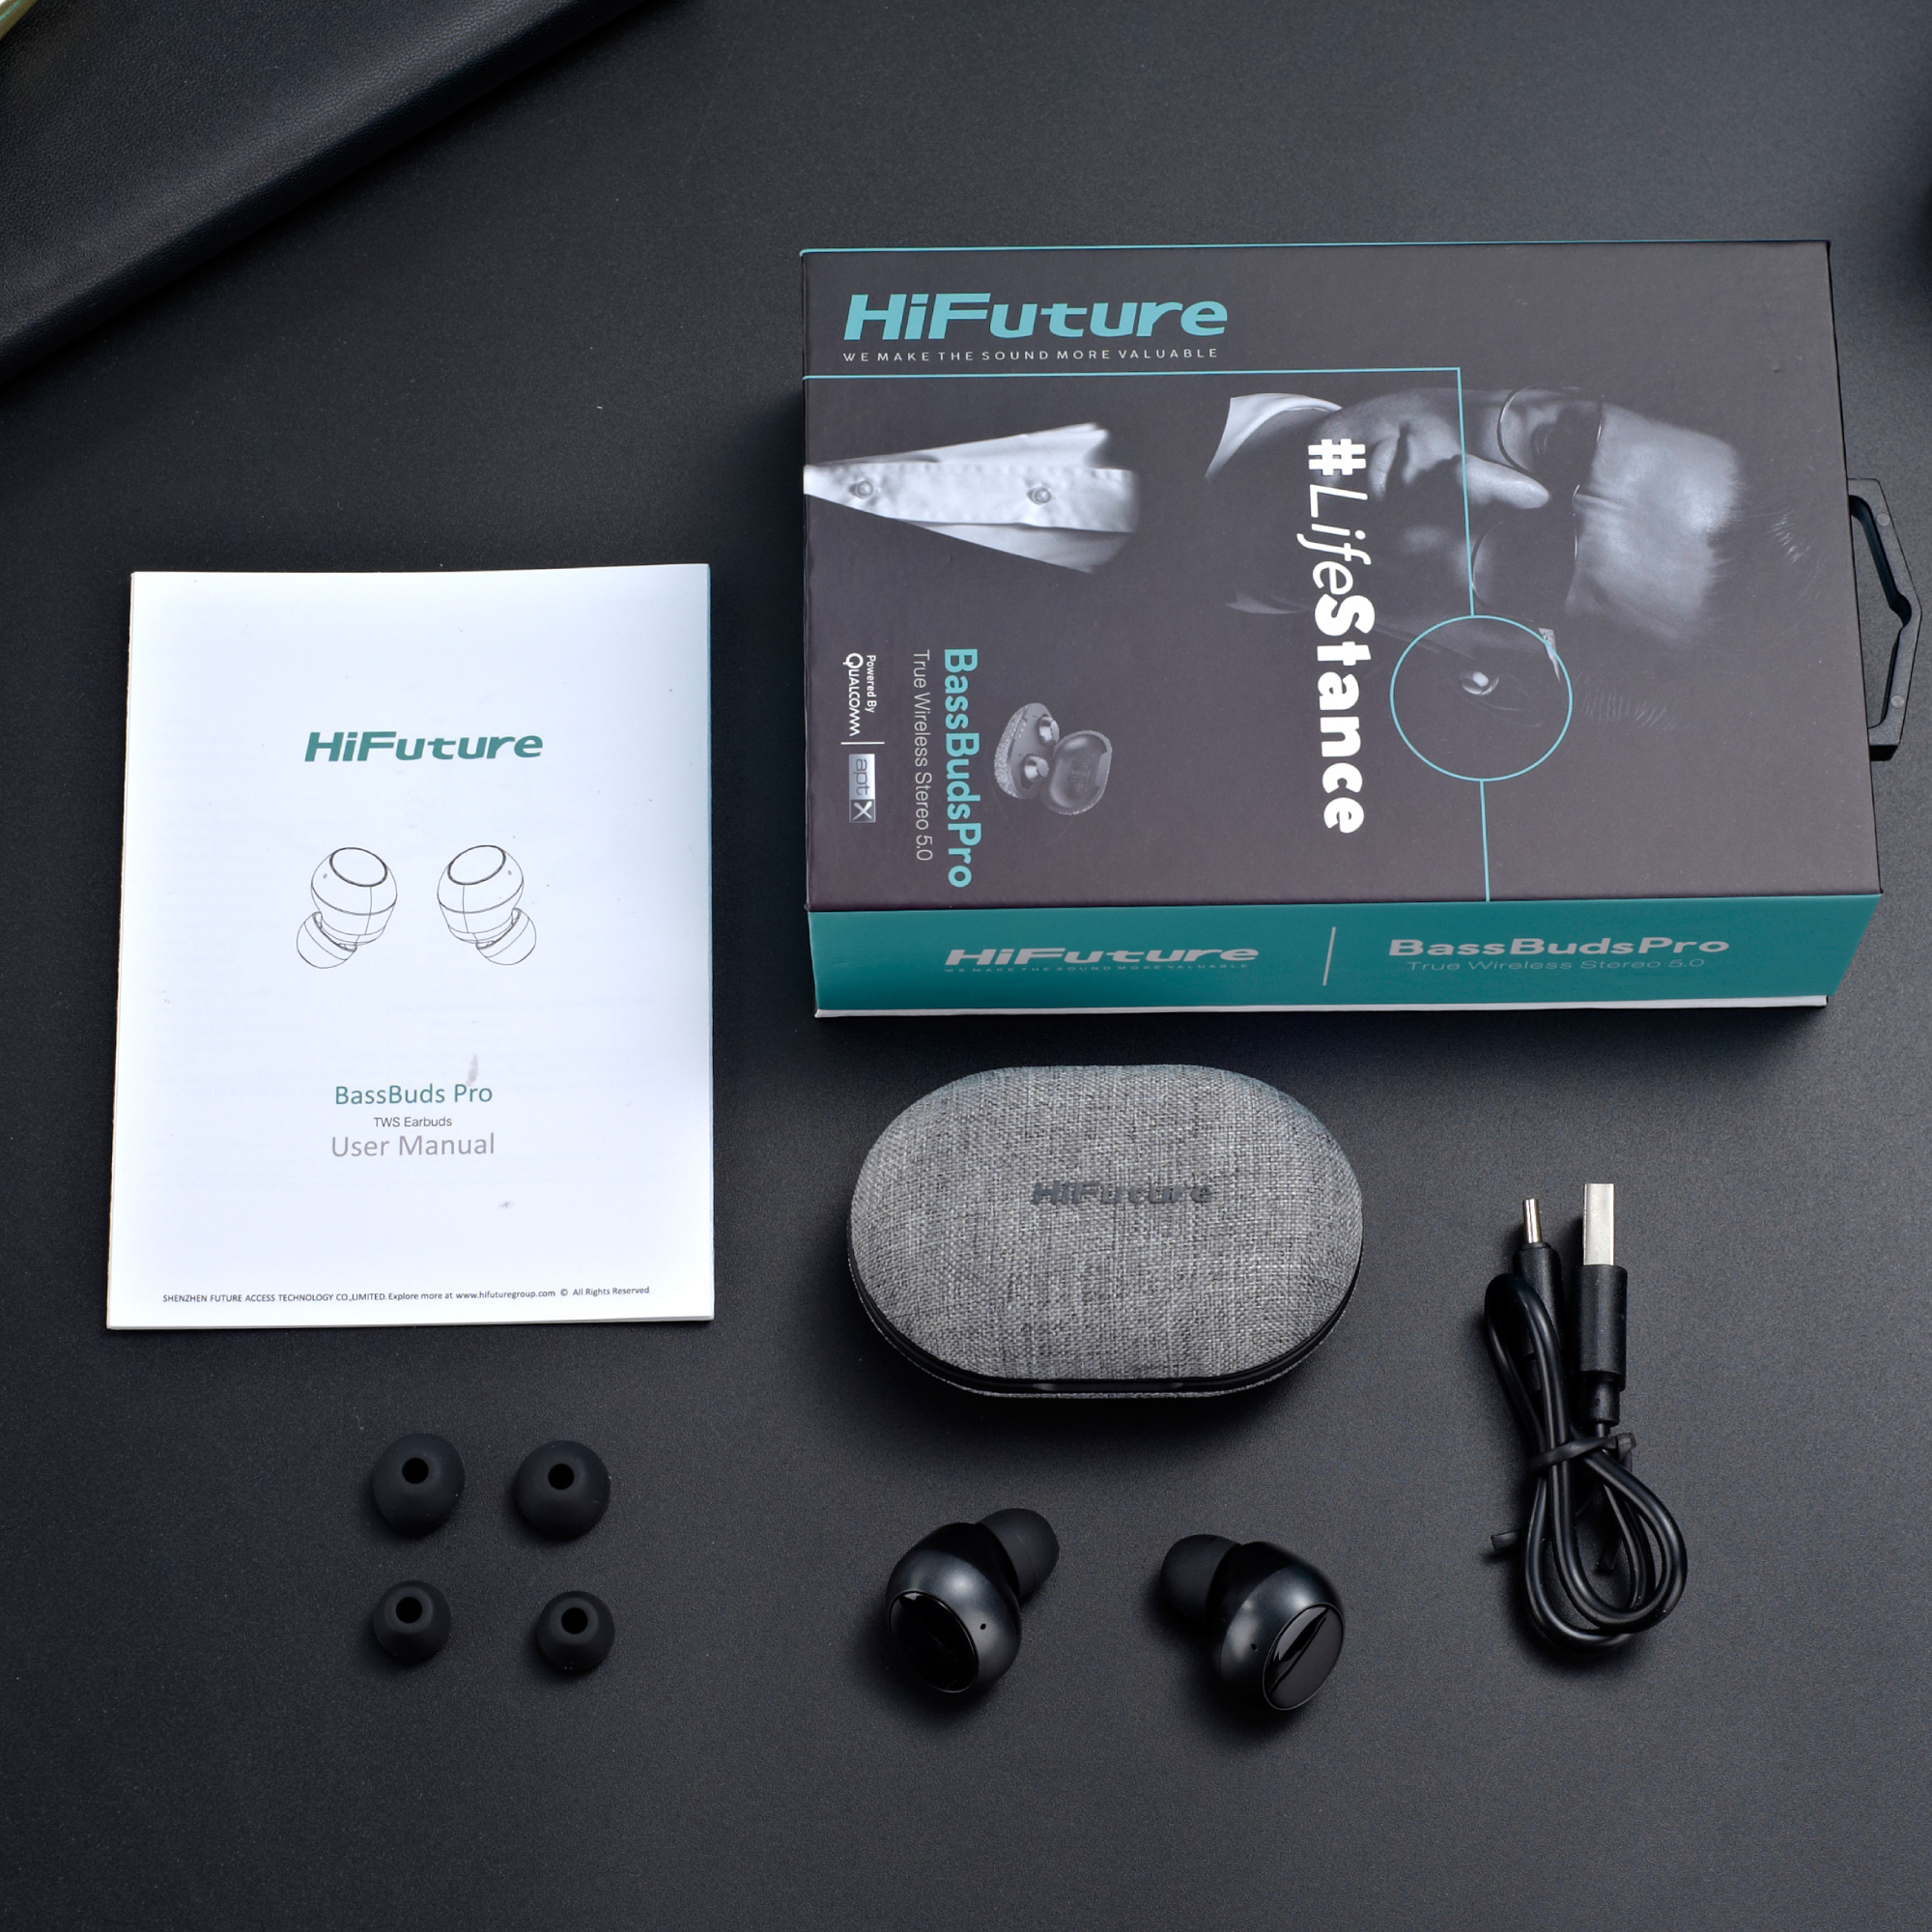 Tai nghe Bluetooth 5.0 - Tai nghe TWS - BassBuds Pro - HiFuture - Qualcomm Chipset - Soft Bass Acoustic/Stereo/Touch Control/IPX6/Up to 27hr/Auto connect (Hàng chính hãng)